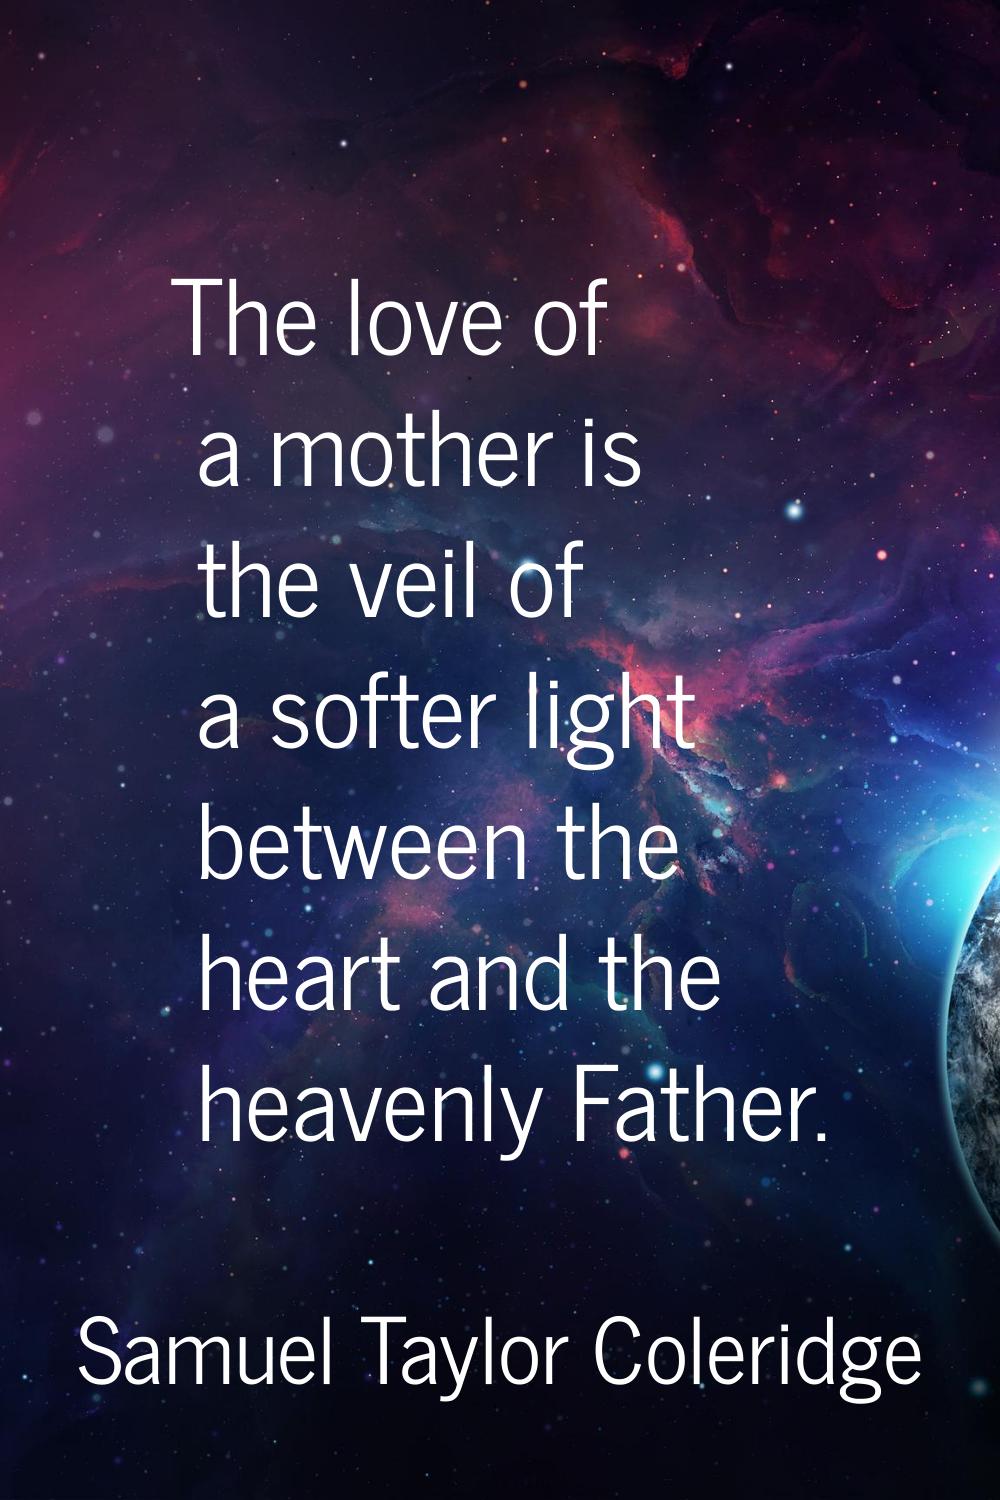 The love of a mother is the veil of a softer light between the heart and the heavenly Father.